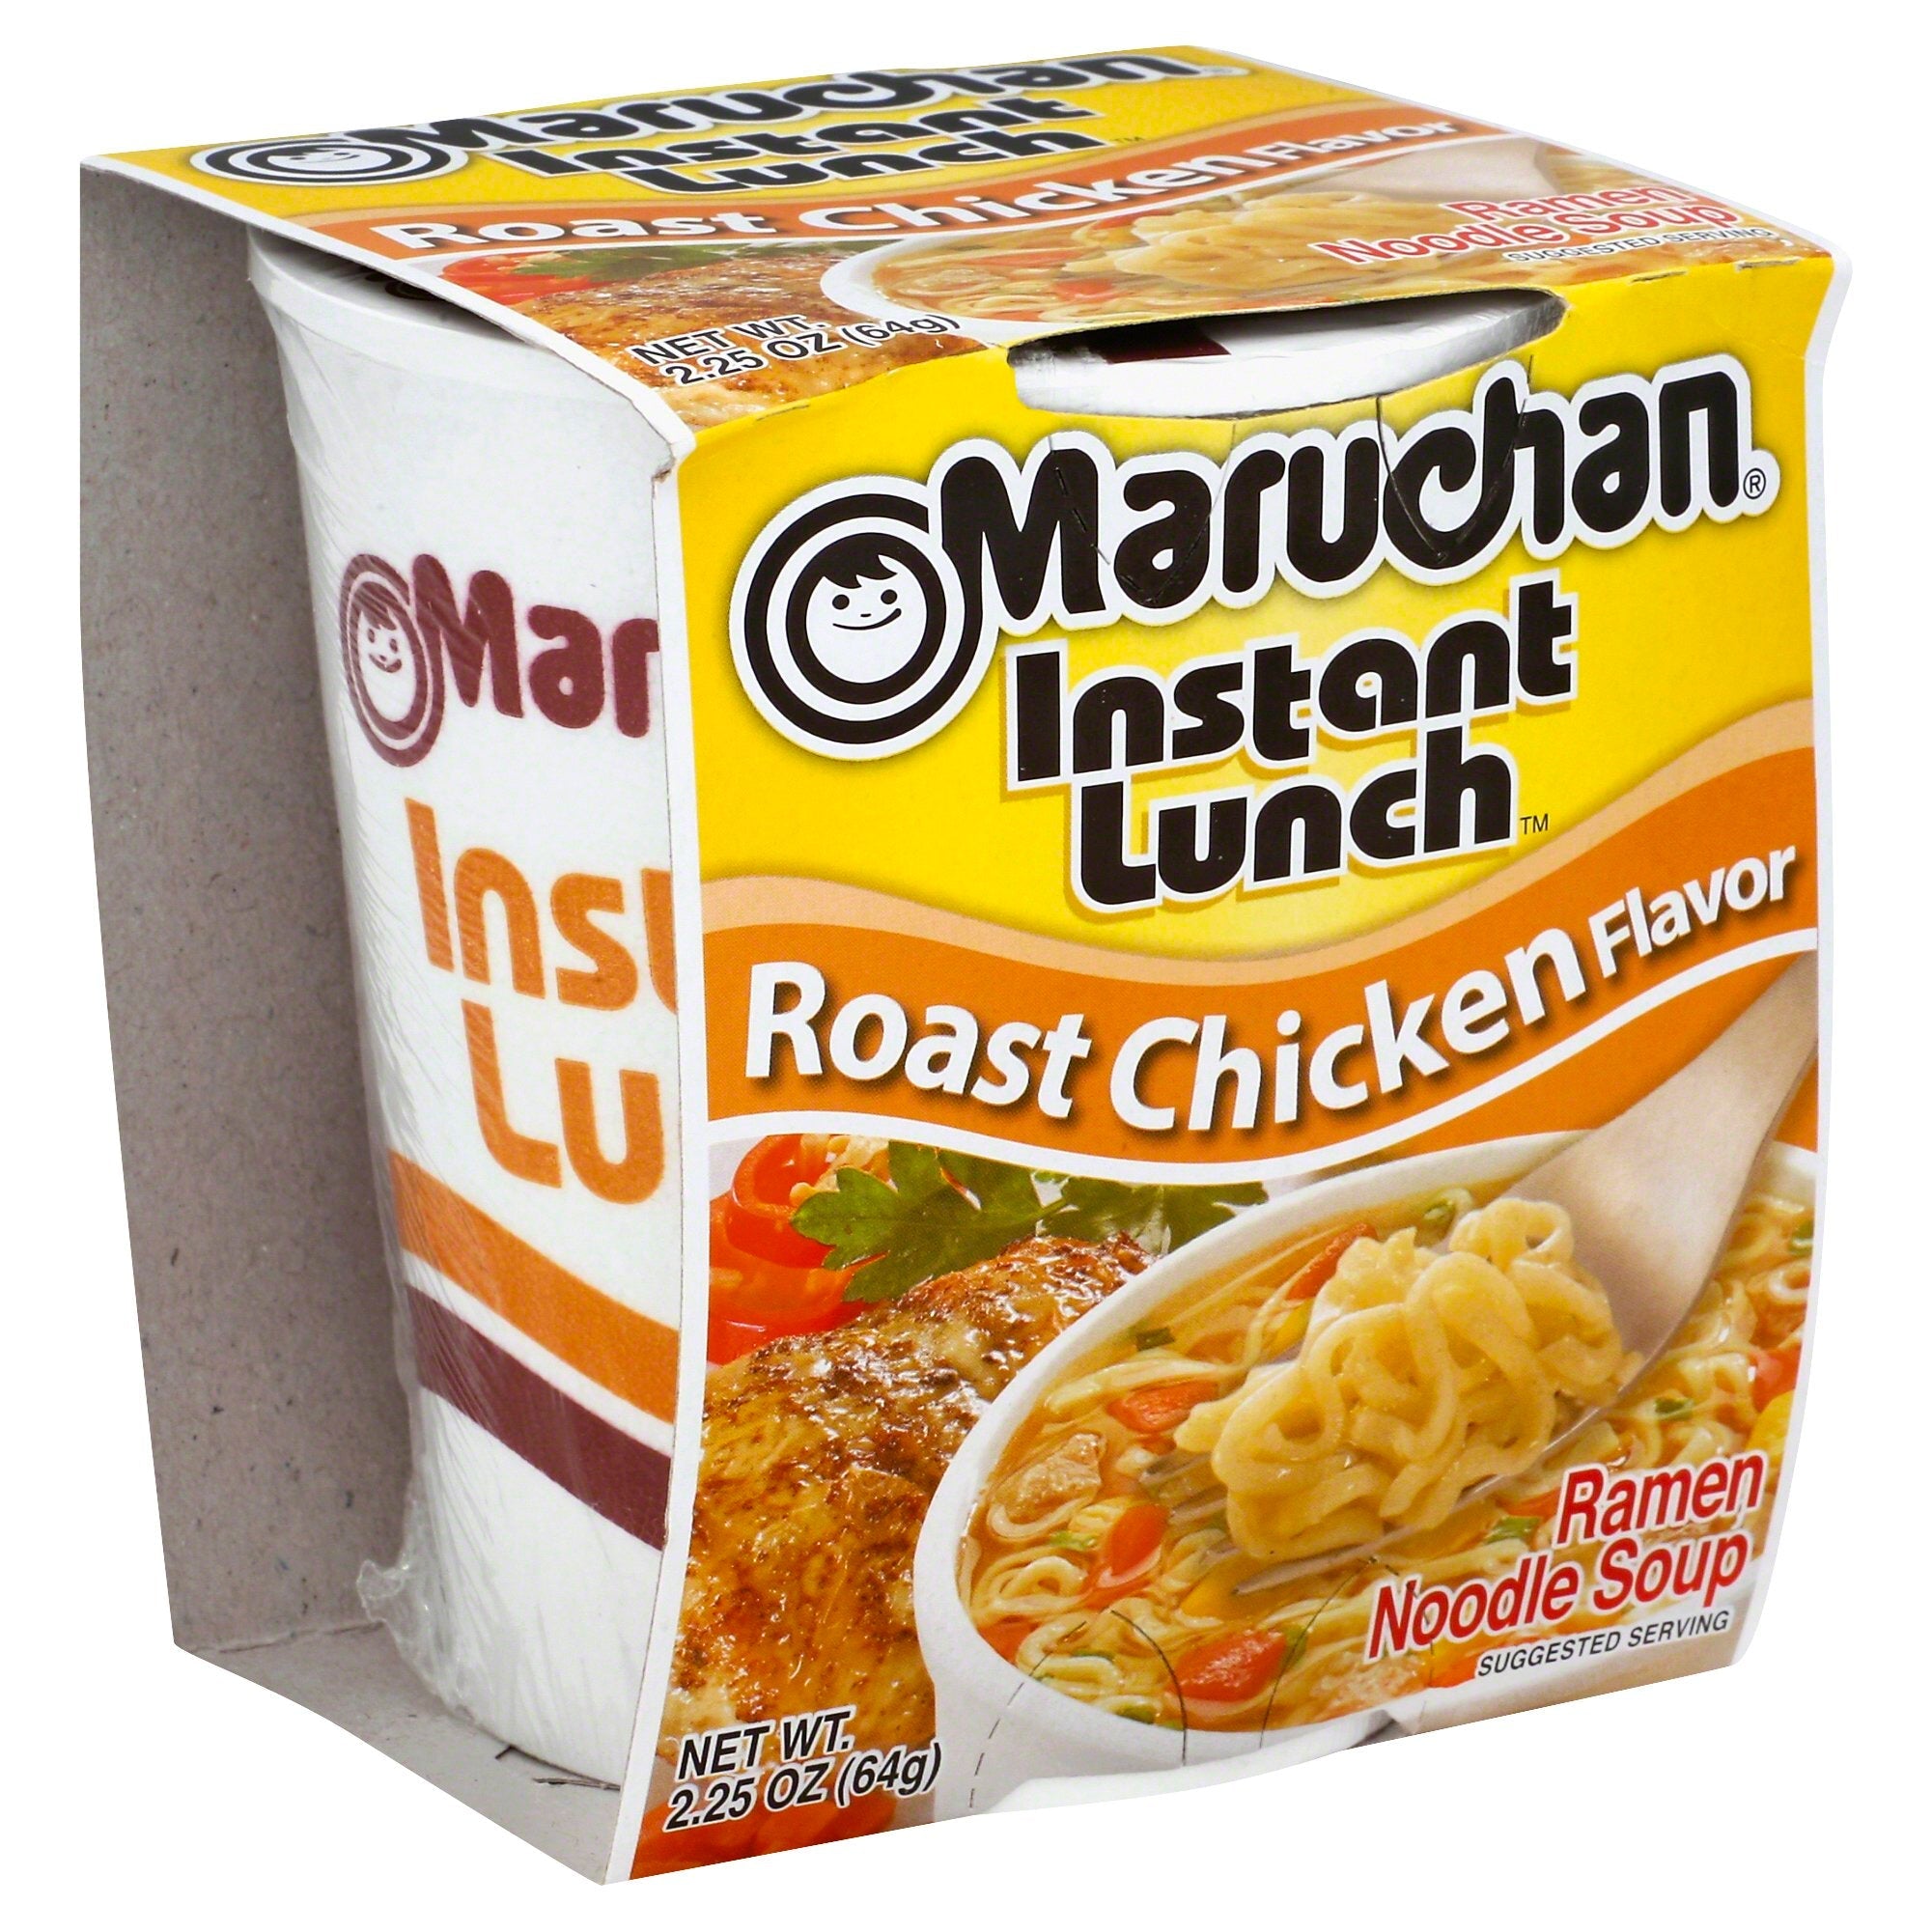 Product Review: Maruchan Instant Lunch Cheddar Cheese Flavor